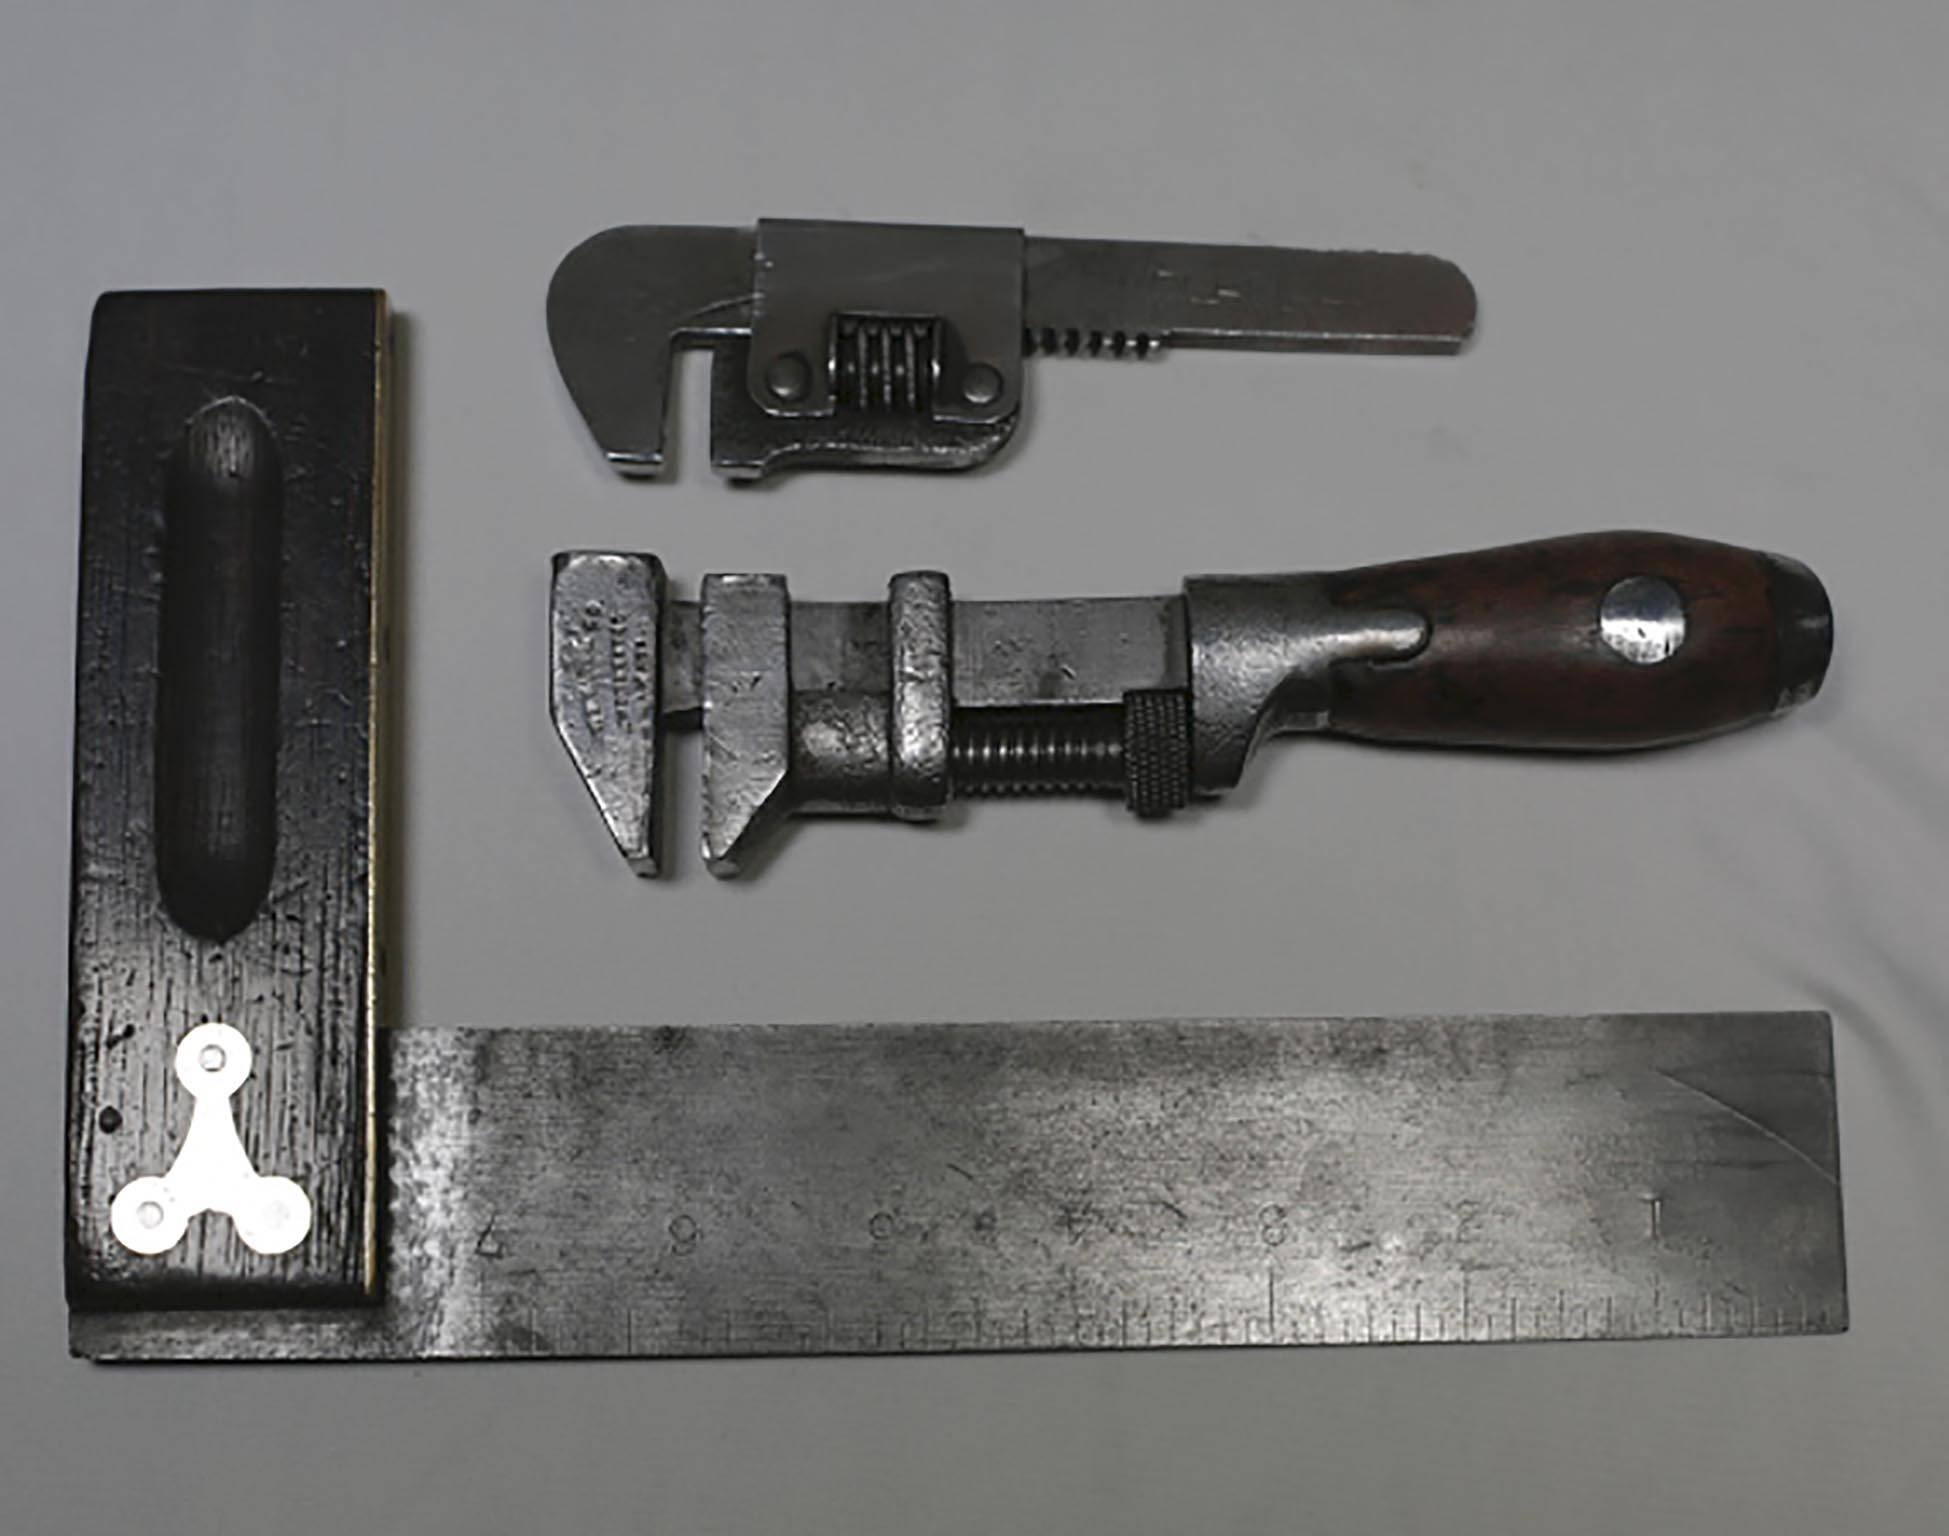 Collection of 3 vintage carbon steel tools, circa 1891-1940s:

Hammer: 13.5" 
Jeweler's Hammer: 6" (SOLD)
Wakefield adjustable Wrench: 5"
E. Coe's adjustable monkey wrench with wooden handle circa 1891: 6.5" (SOLD
Rosewood and